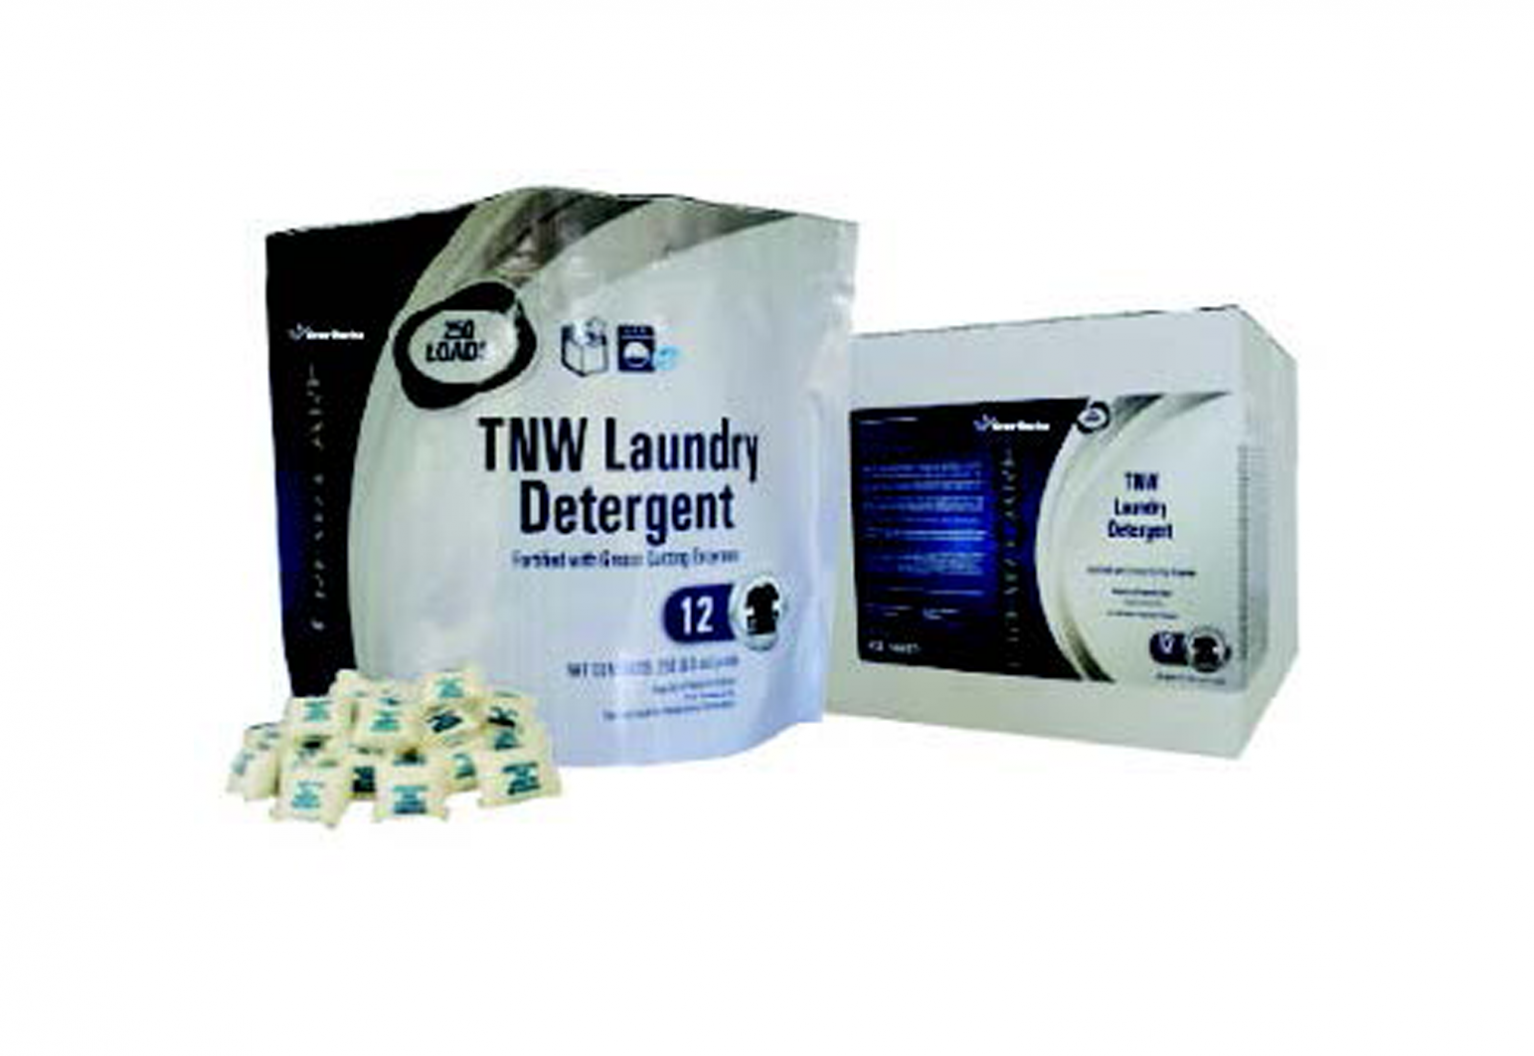 Crew Care TNW Laundry Detergent from Drew Marine provides easy and sustainable laundry without exposure to traditional harsh chemicals.